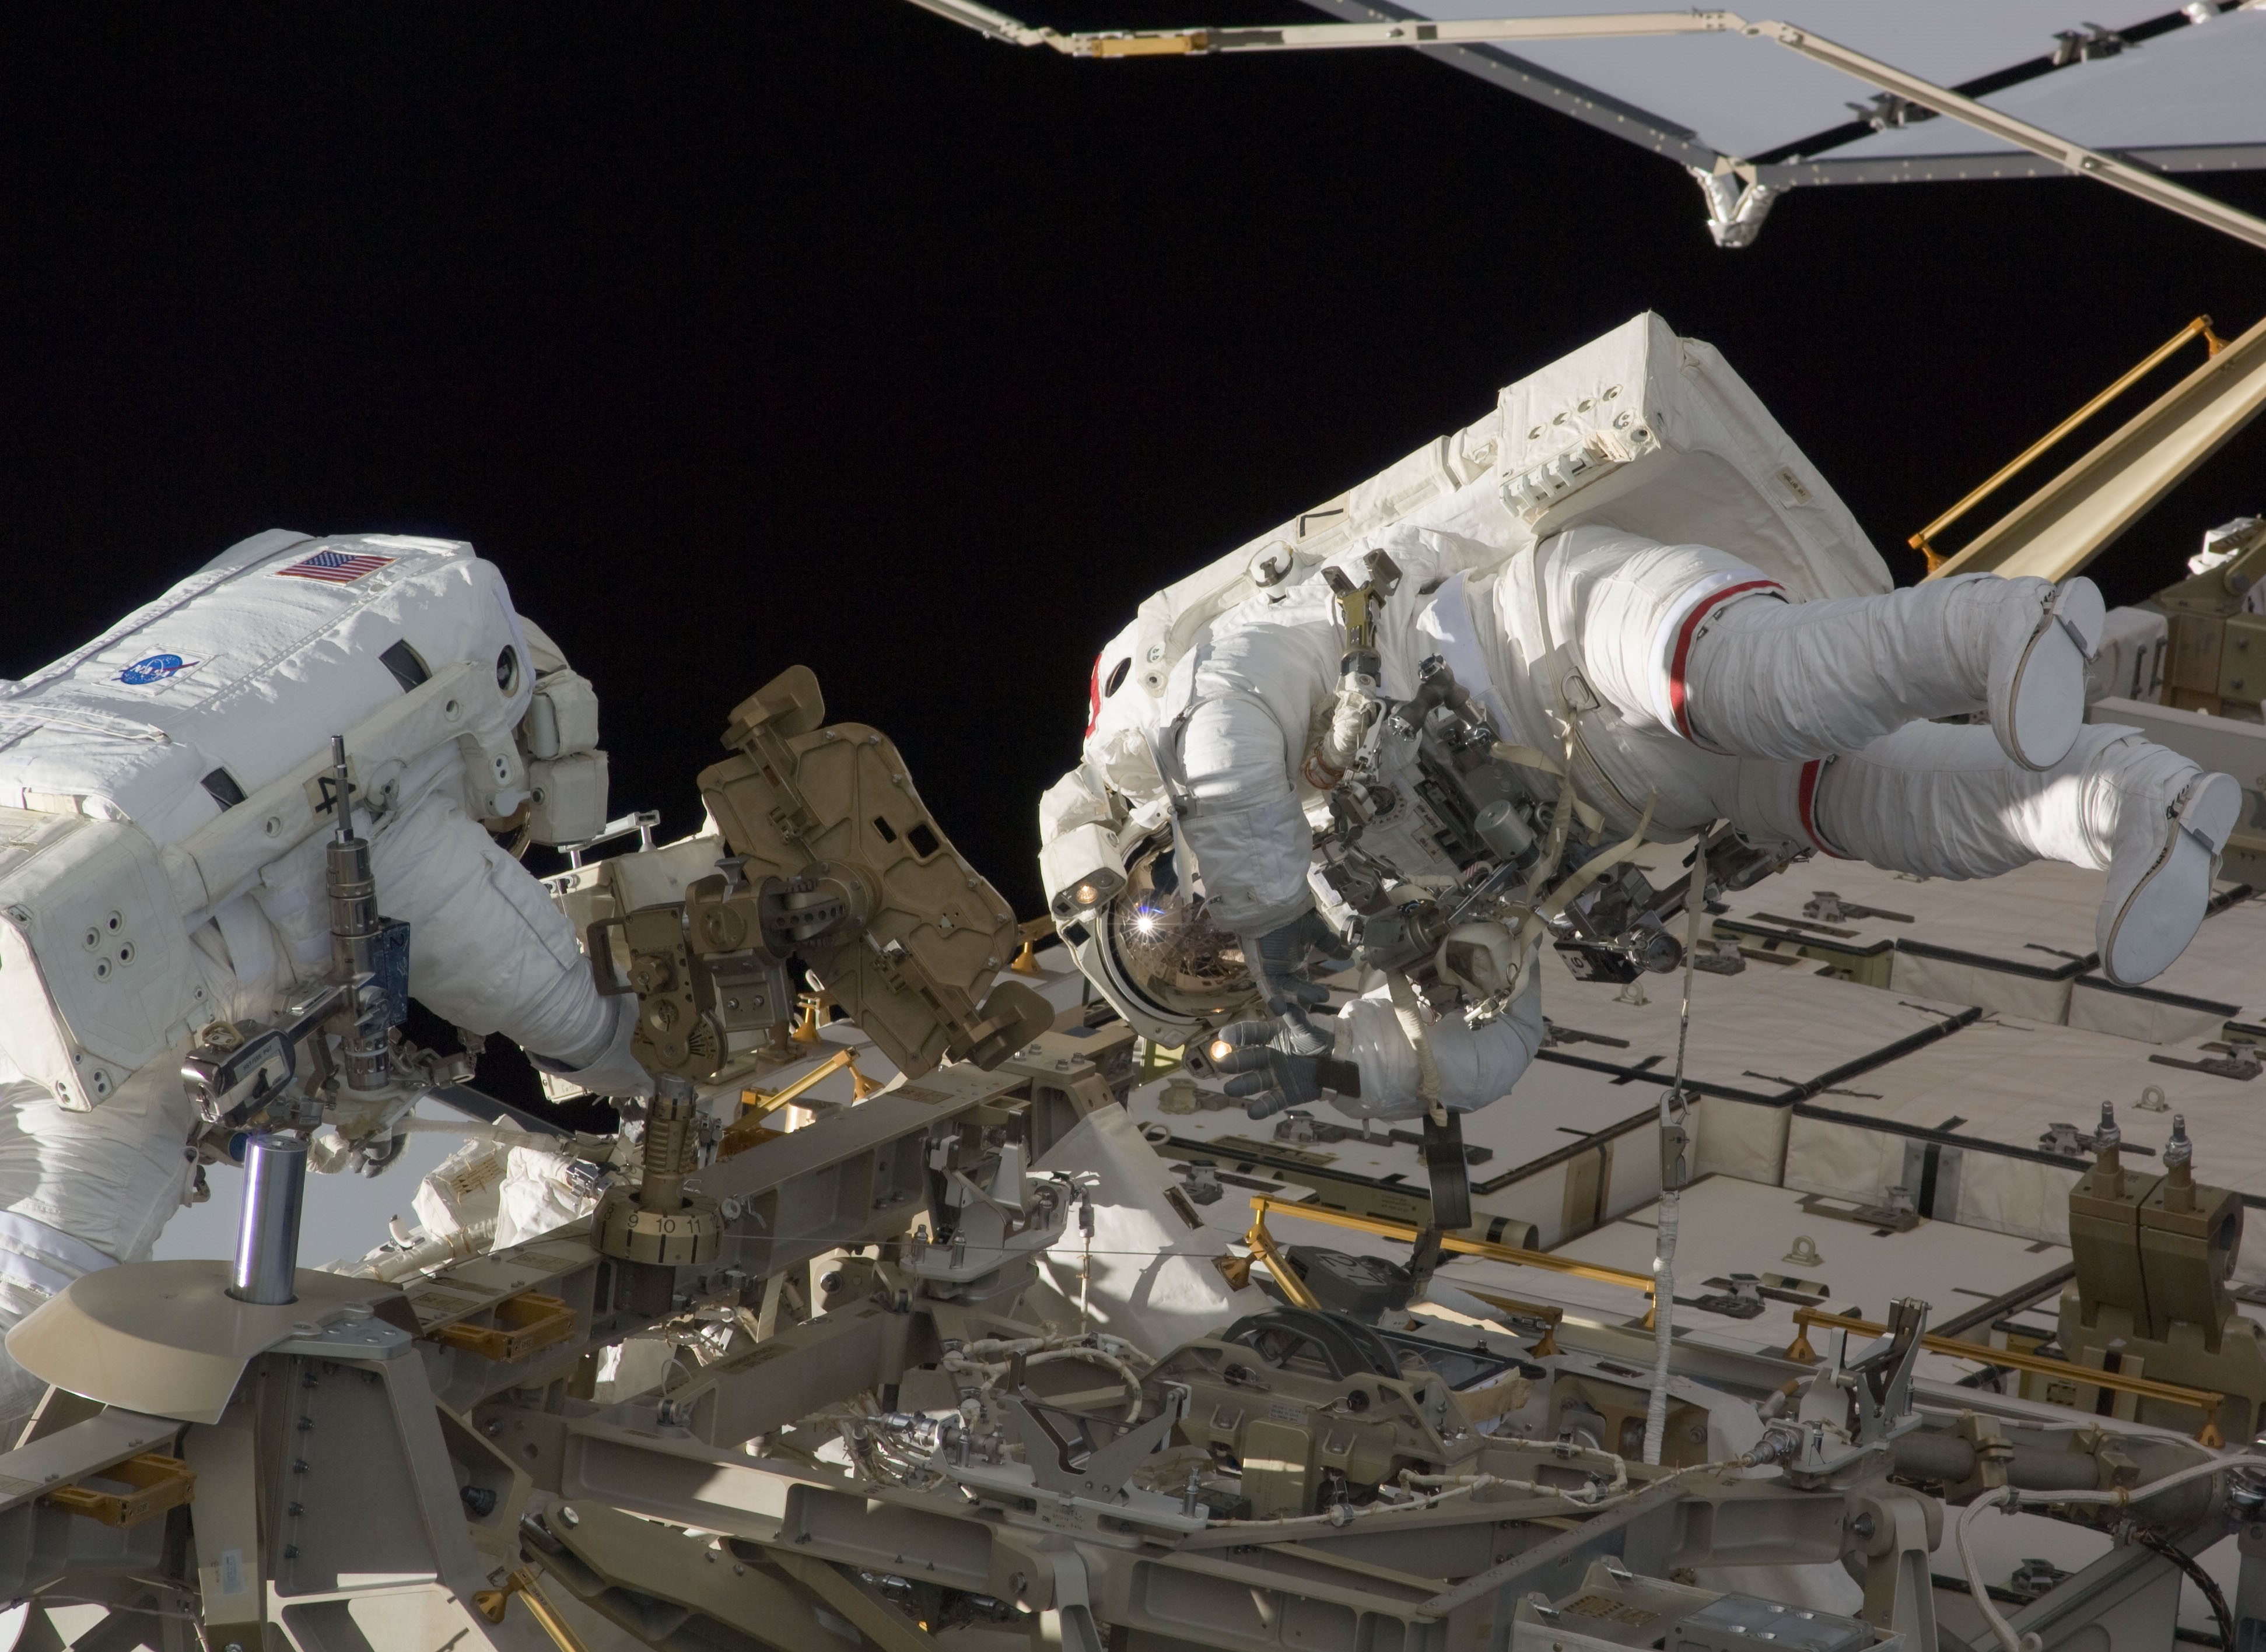 Timothy L. Kopra, left, and David A. Wolf work on the station's truss during the mission's first spacewalk